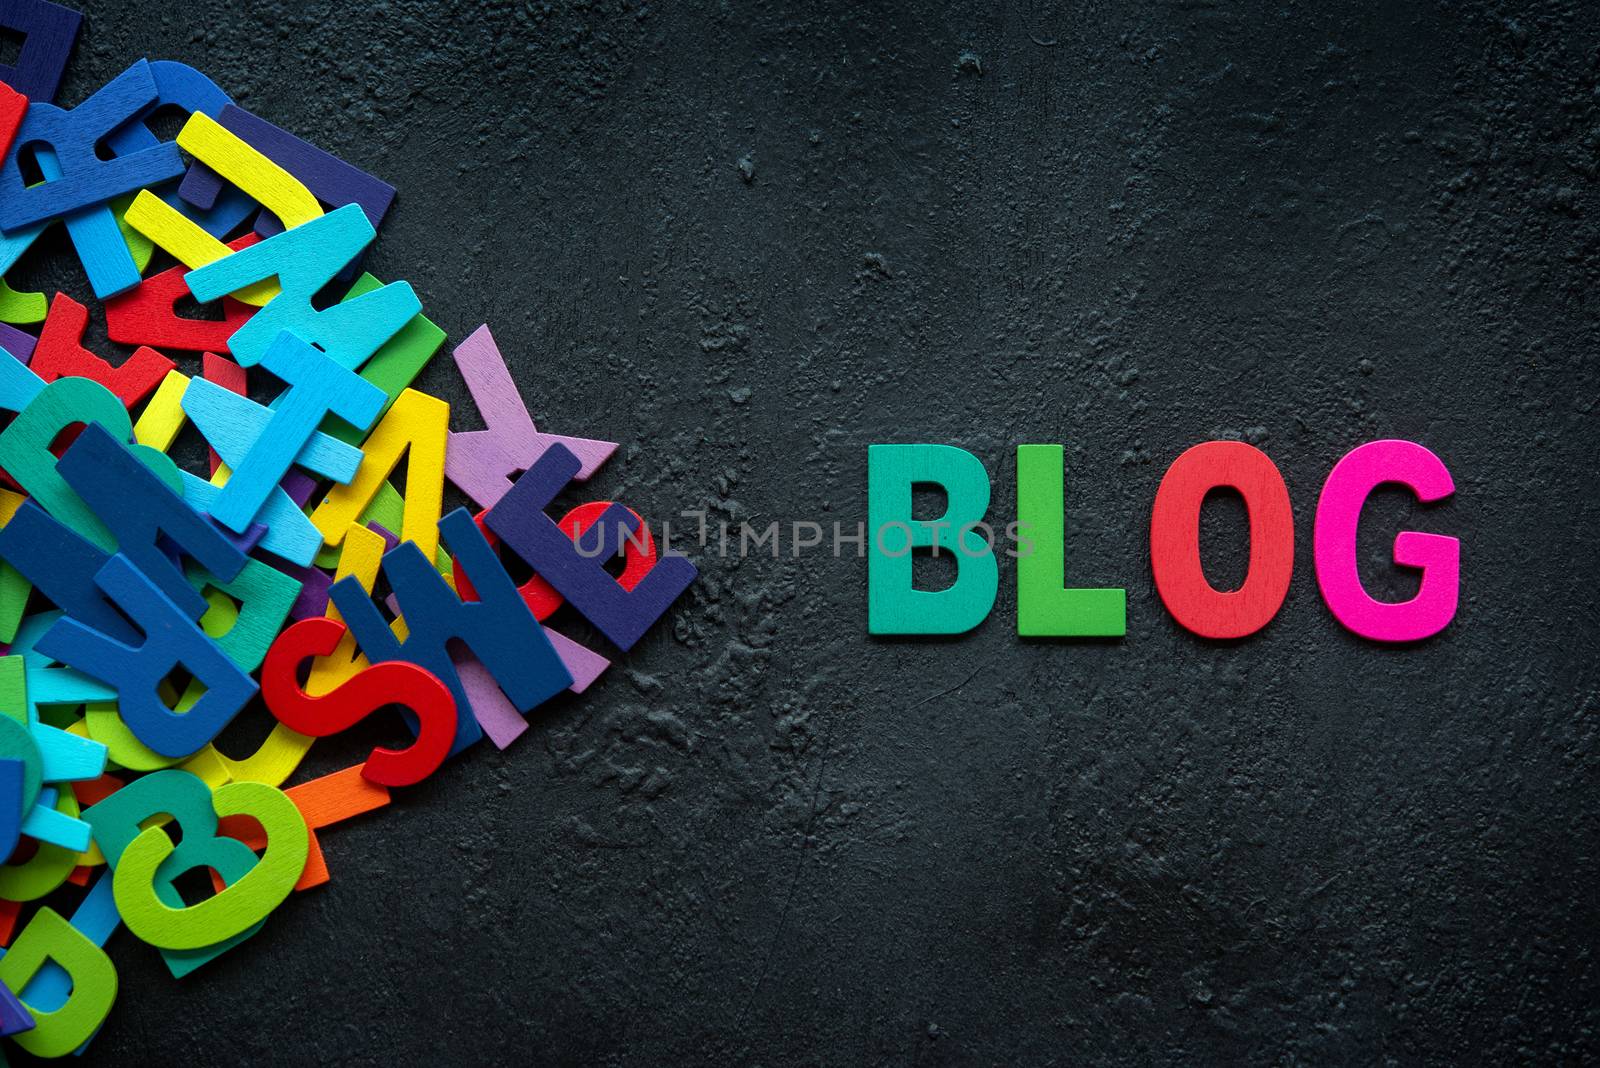 The colorful words "BLOG" made with wooden letters next to a pile of other letters over dark background.